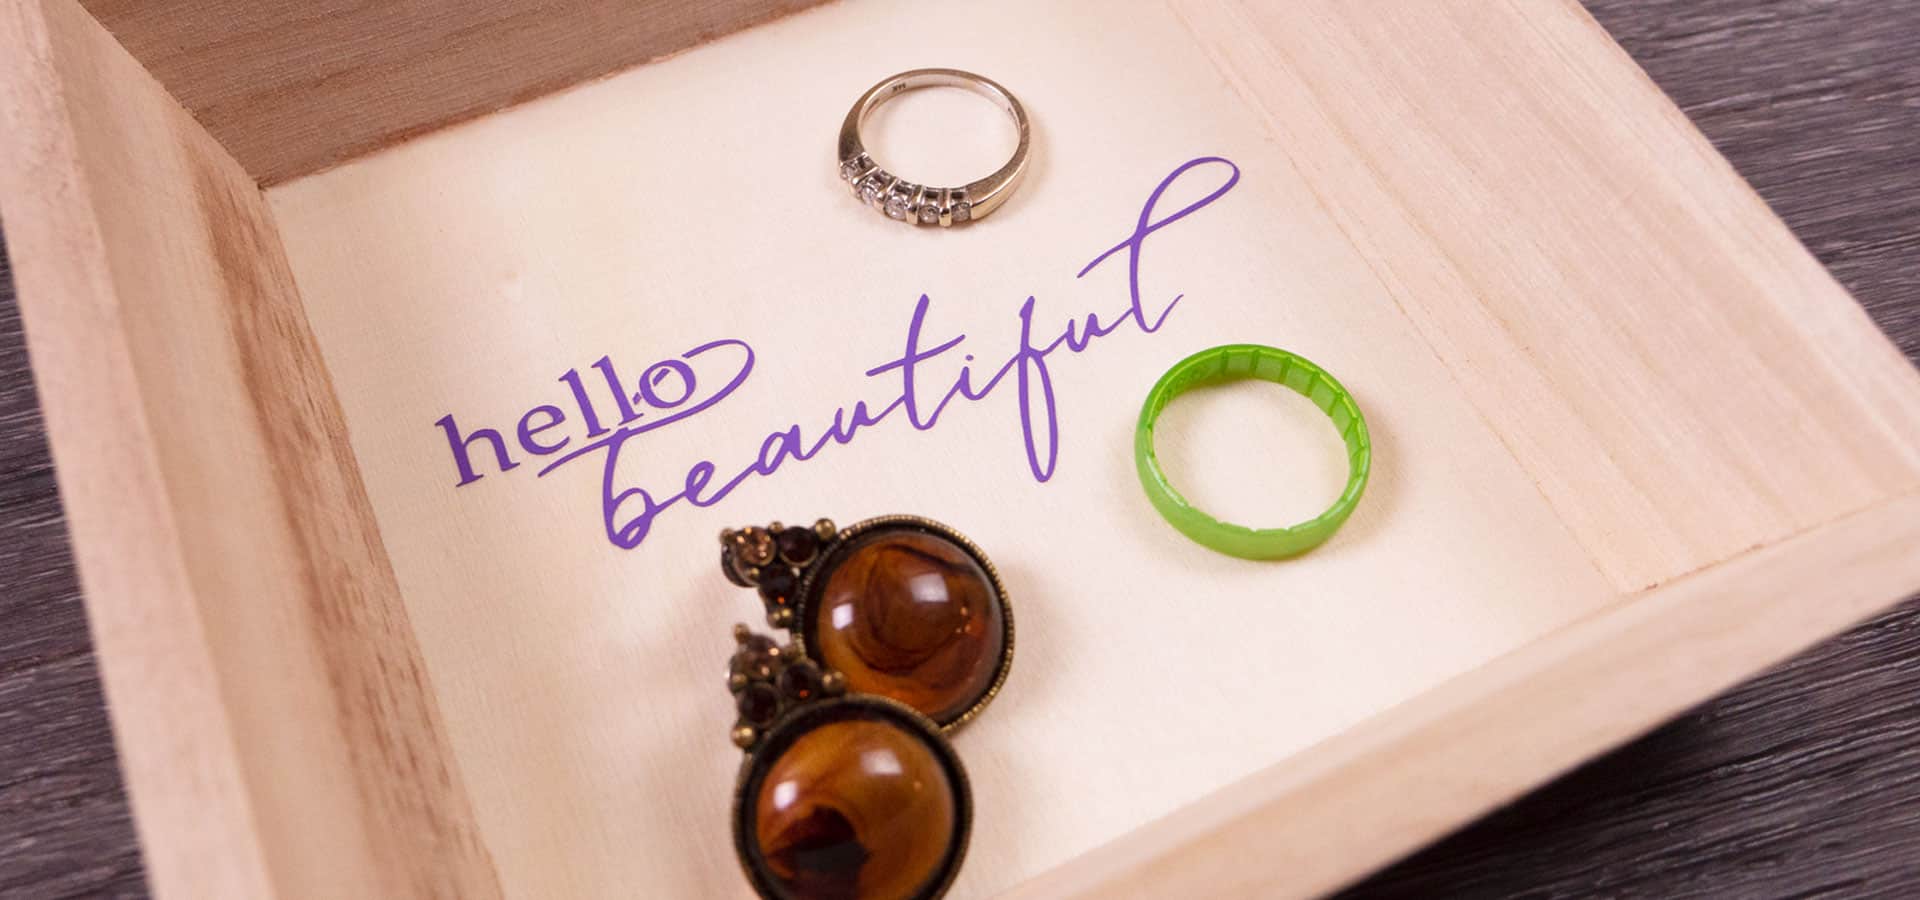 A wooden jewelry plate decorated with psv that says "Hello beautiful"